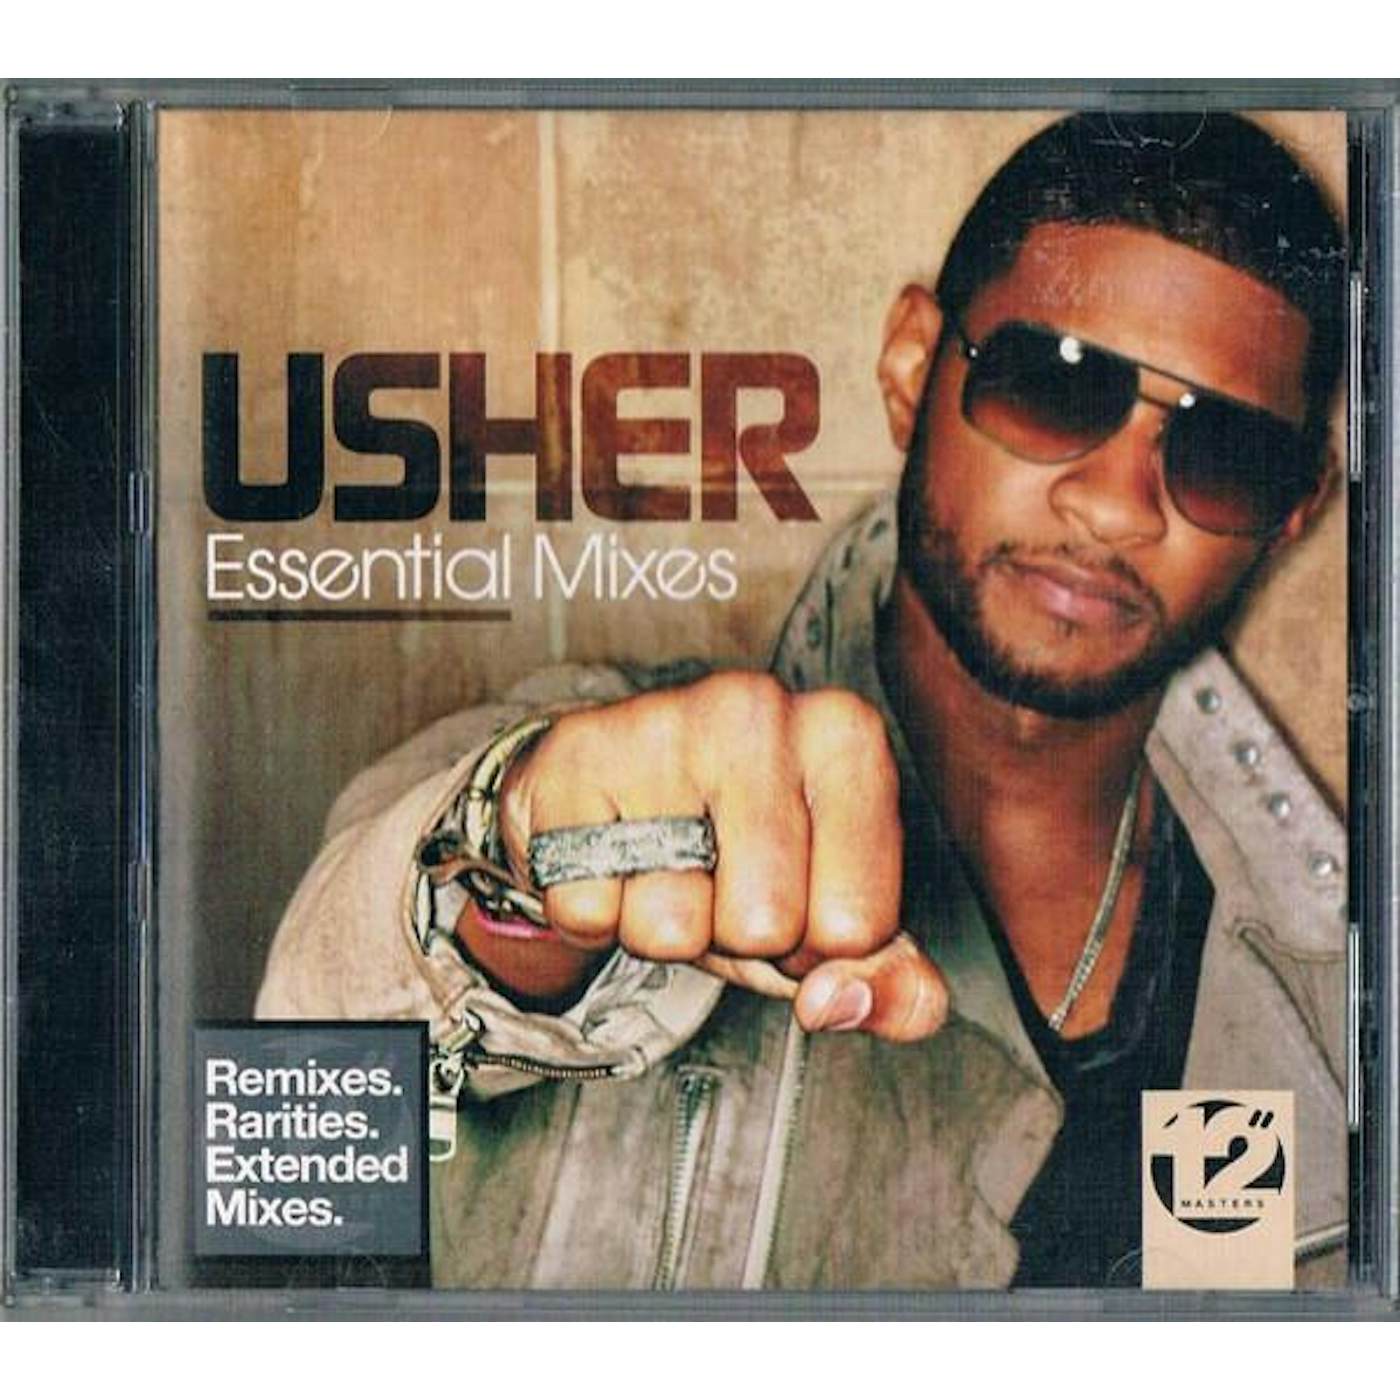 USHER 12 INCH MASTERS: ESSENTIAL MIXES CD